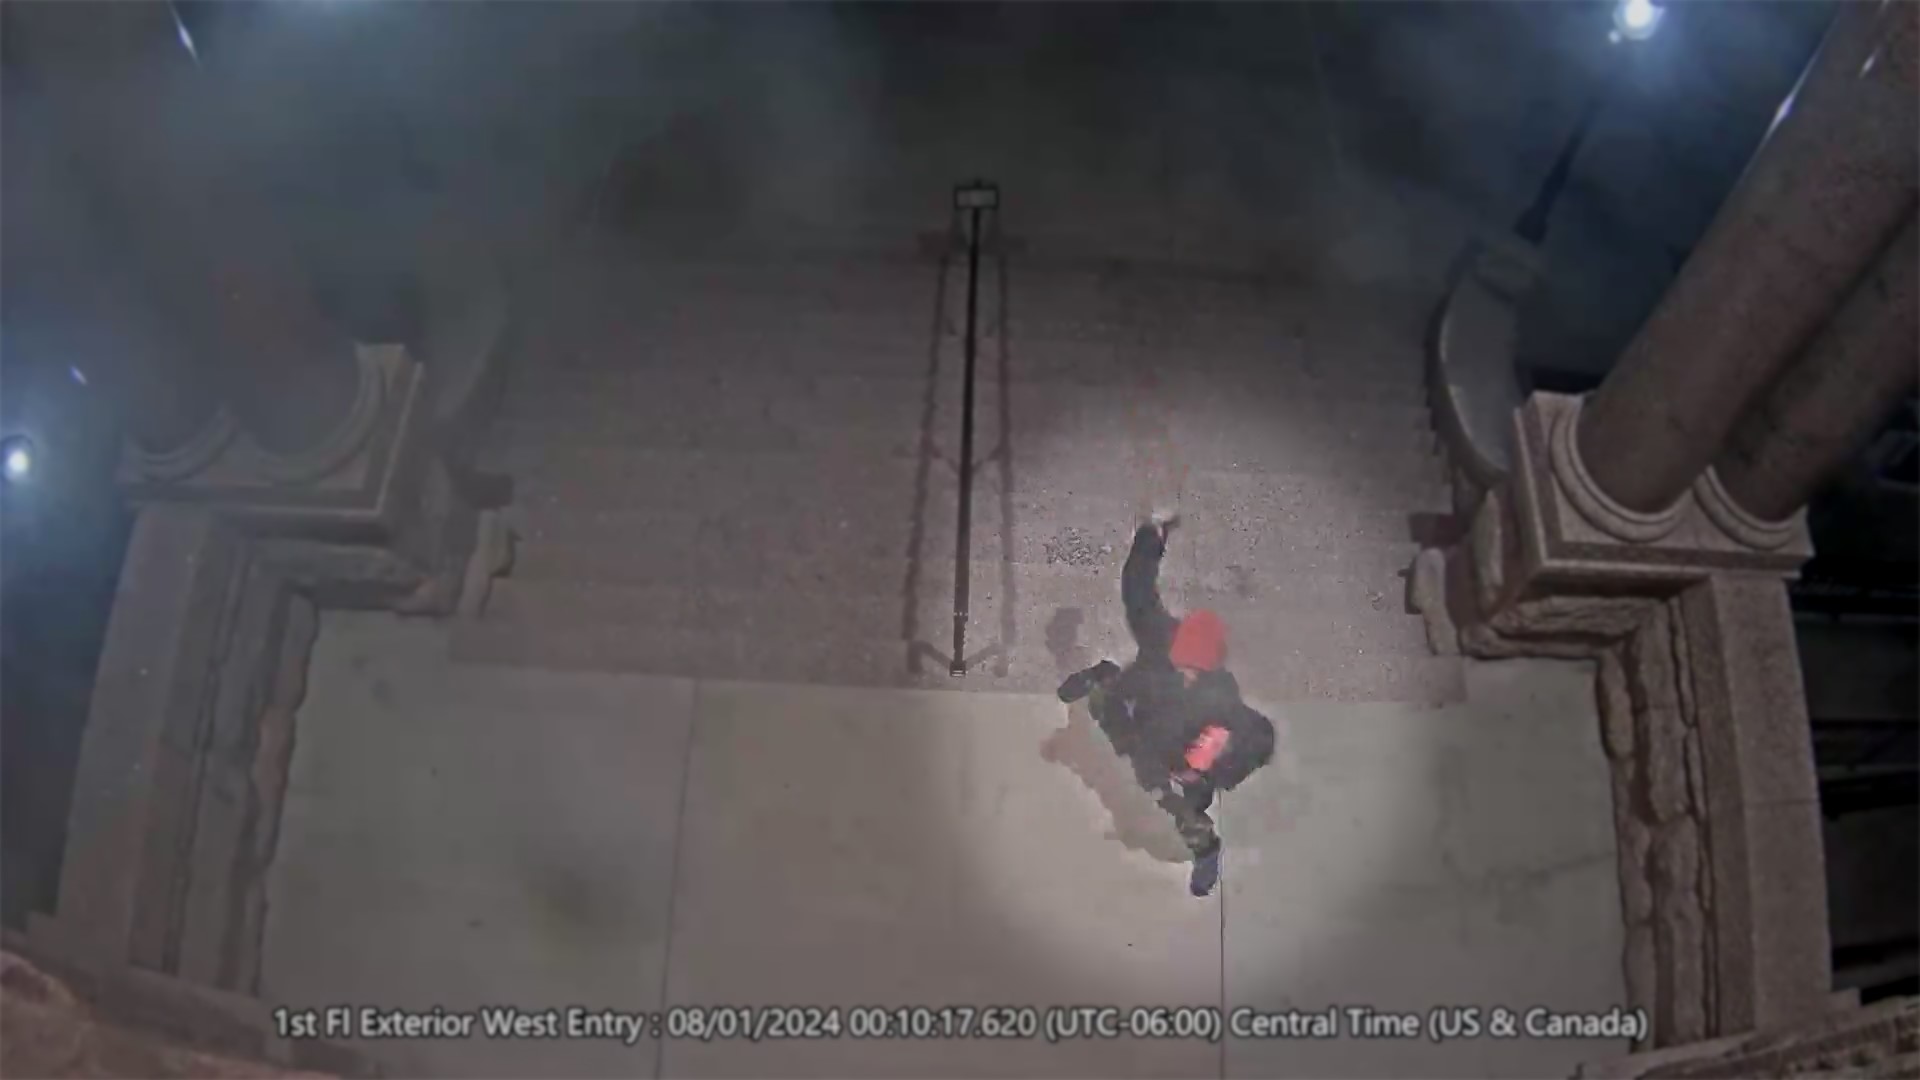 On Jan. 8, 2024, around 12:10 a.m., security camera footage shows a male throwing a rock at the courthouse door. The window on the door was broken.